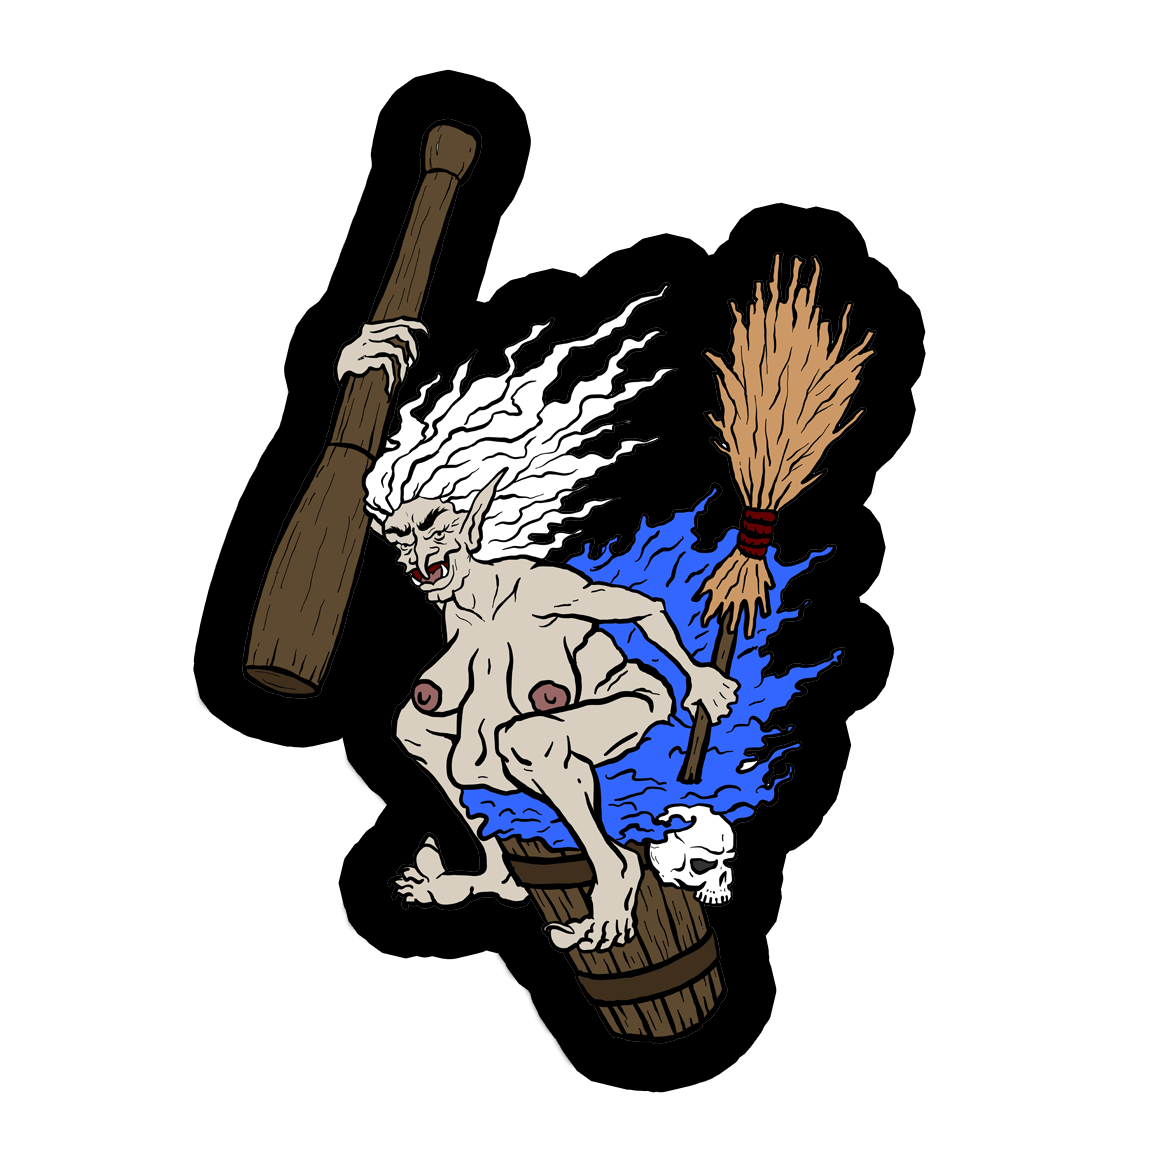 A vinyl sticker of Baba Yaga the crone witch, riding her mortar and pestle with broom in hand. She has taken off her clothing and sits on it with a wicked smile. She has pale skin and white hair, and her discarded clothing is blue.